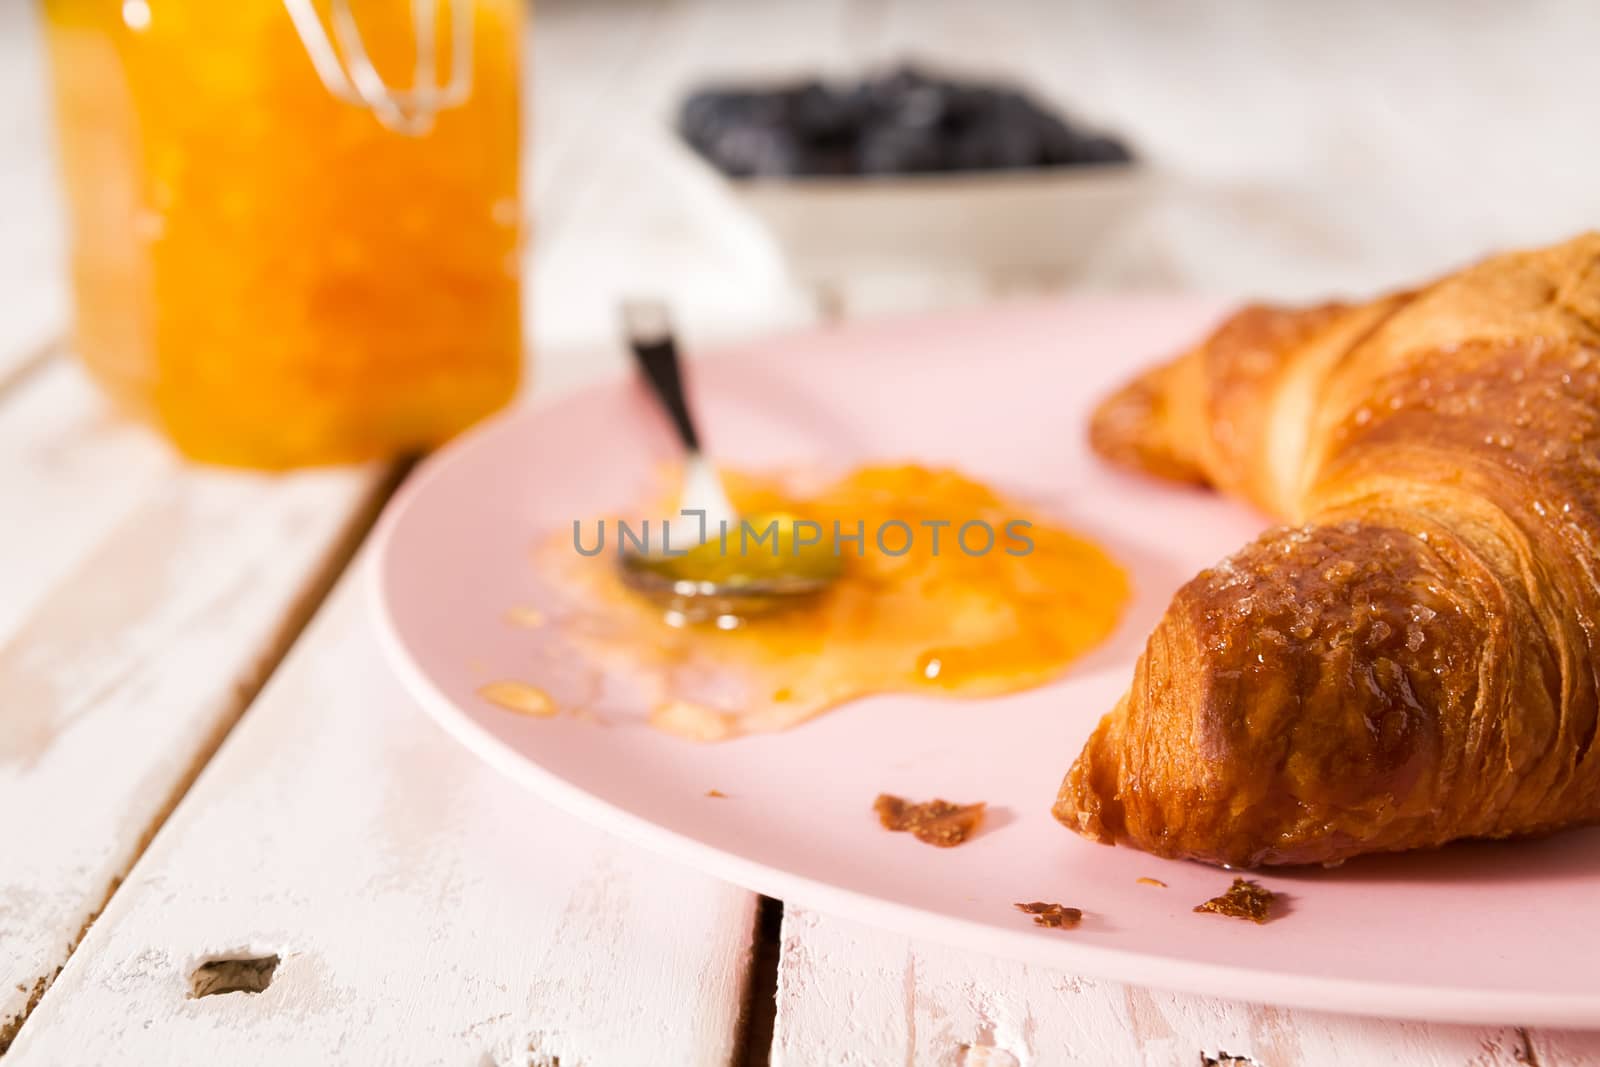 Closeup of croissant and orange jam on a pink plate over a wooden table